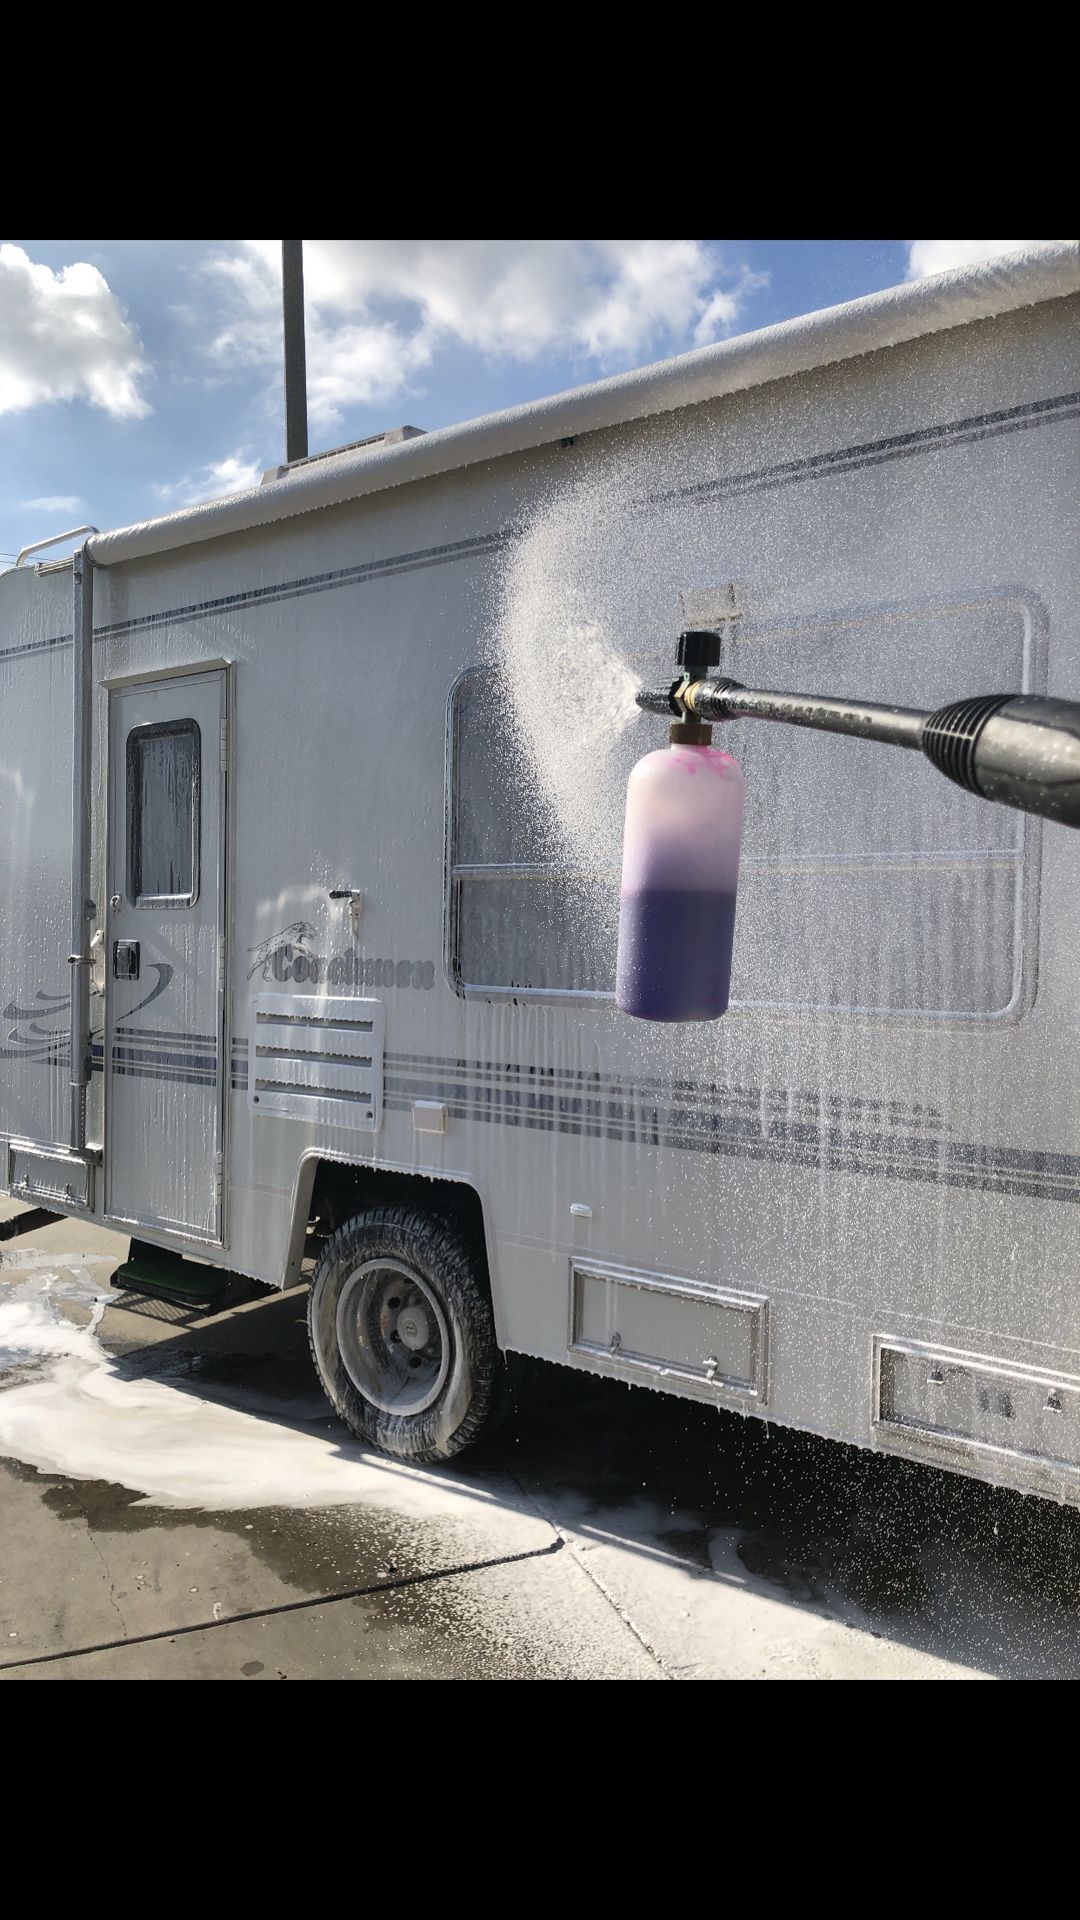 Rv trailer and every day car detailing